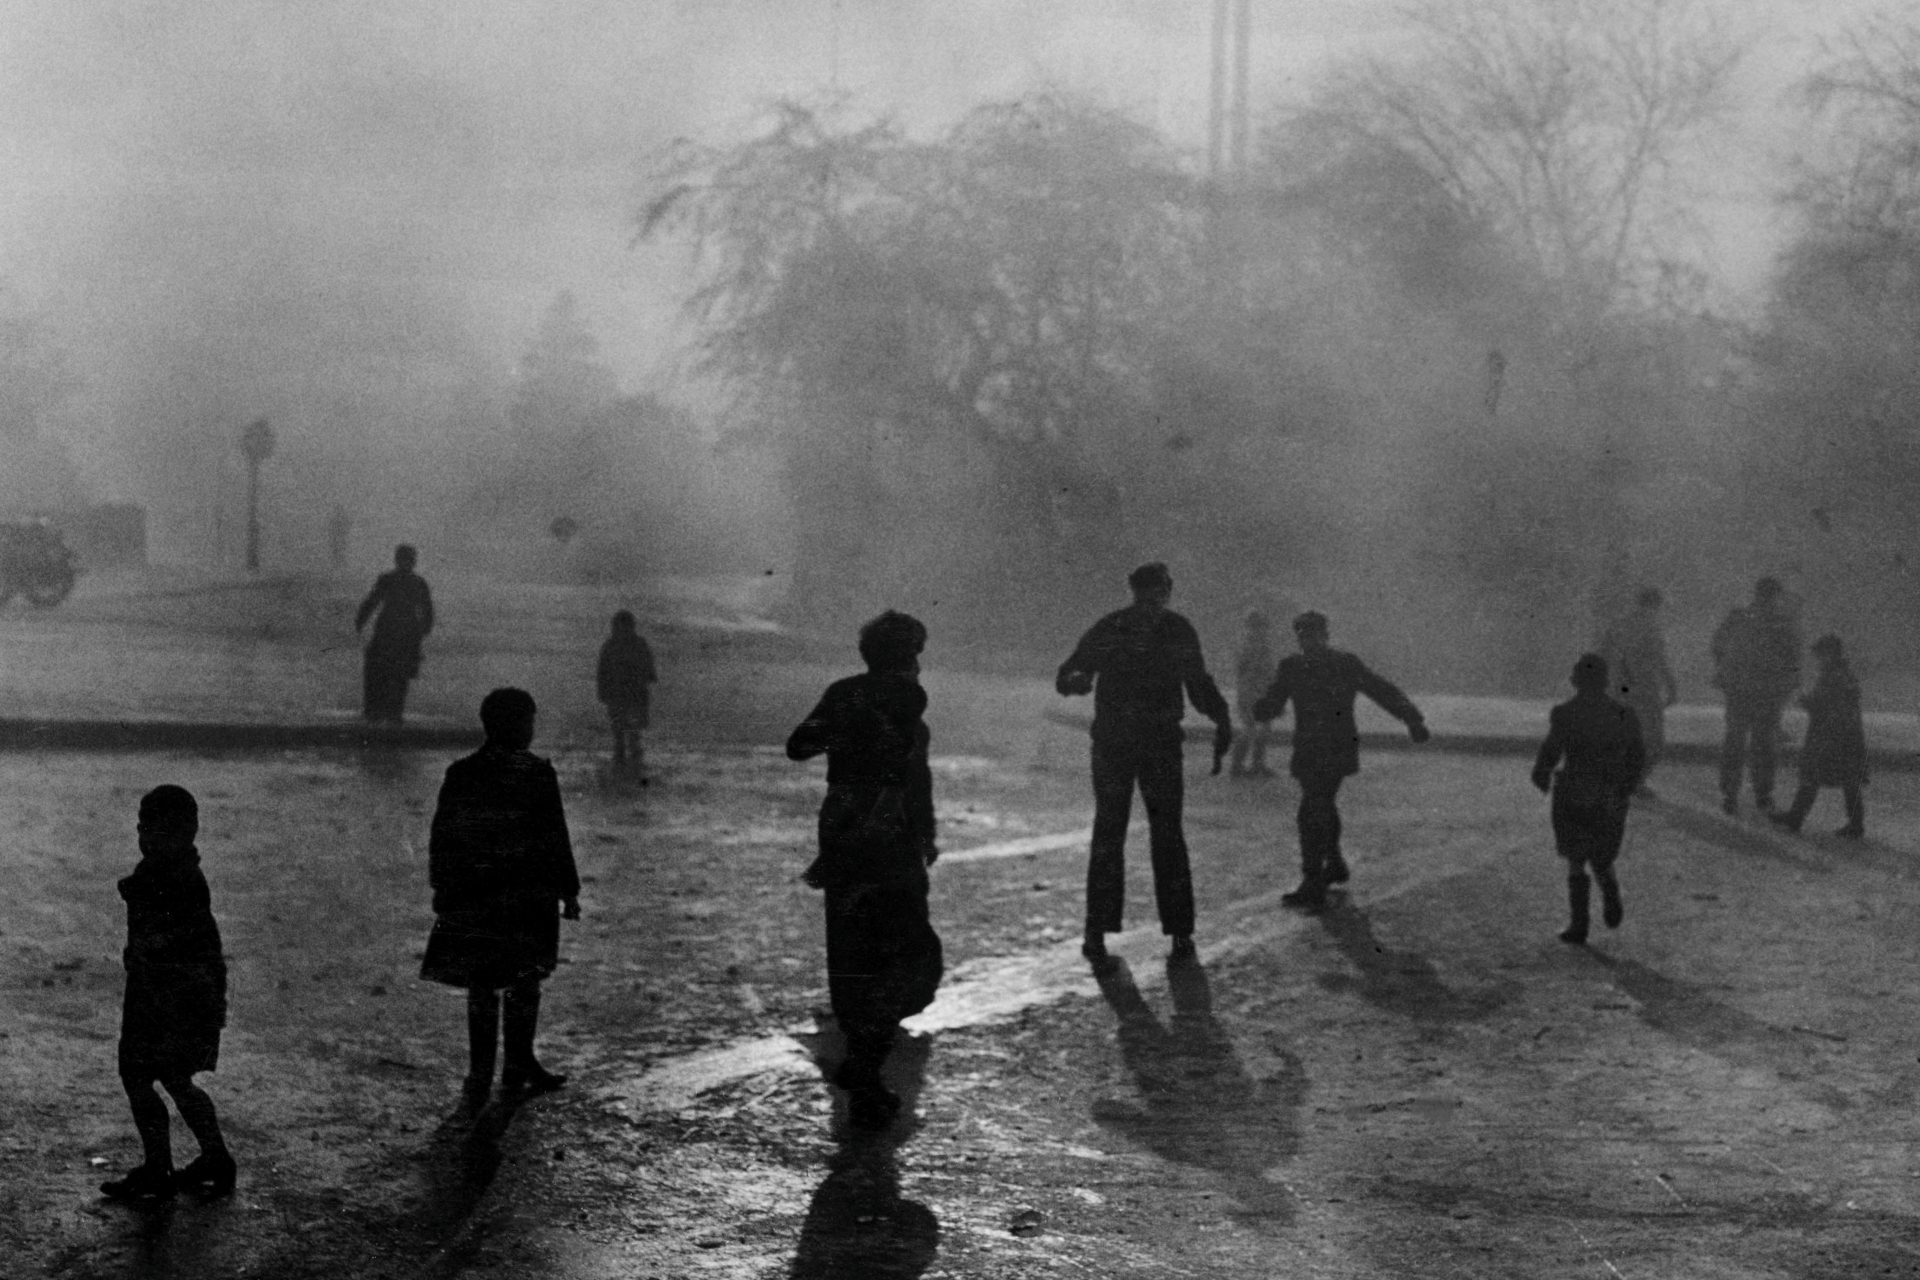 The Great Smog of London: a disaster that killed thousand in 1952